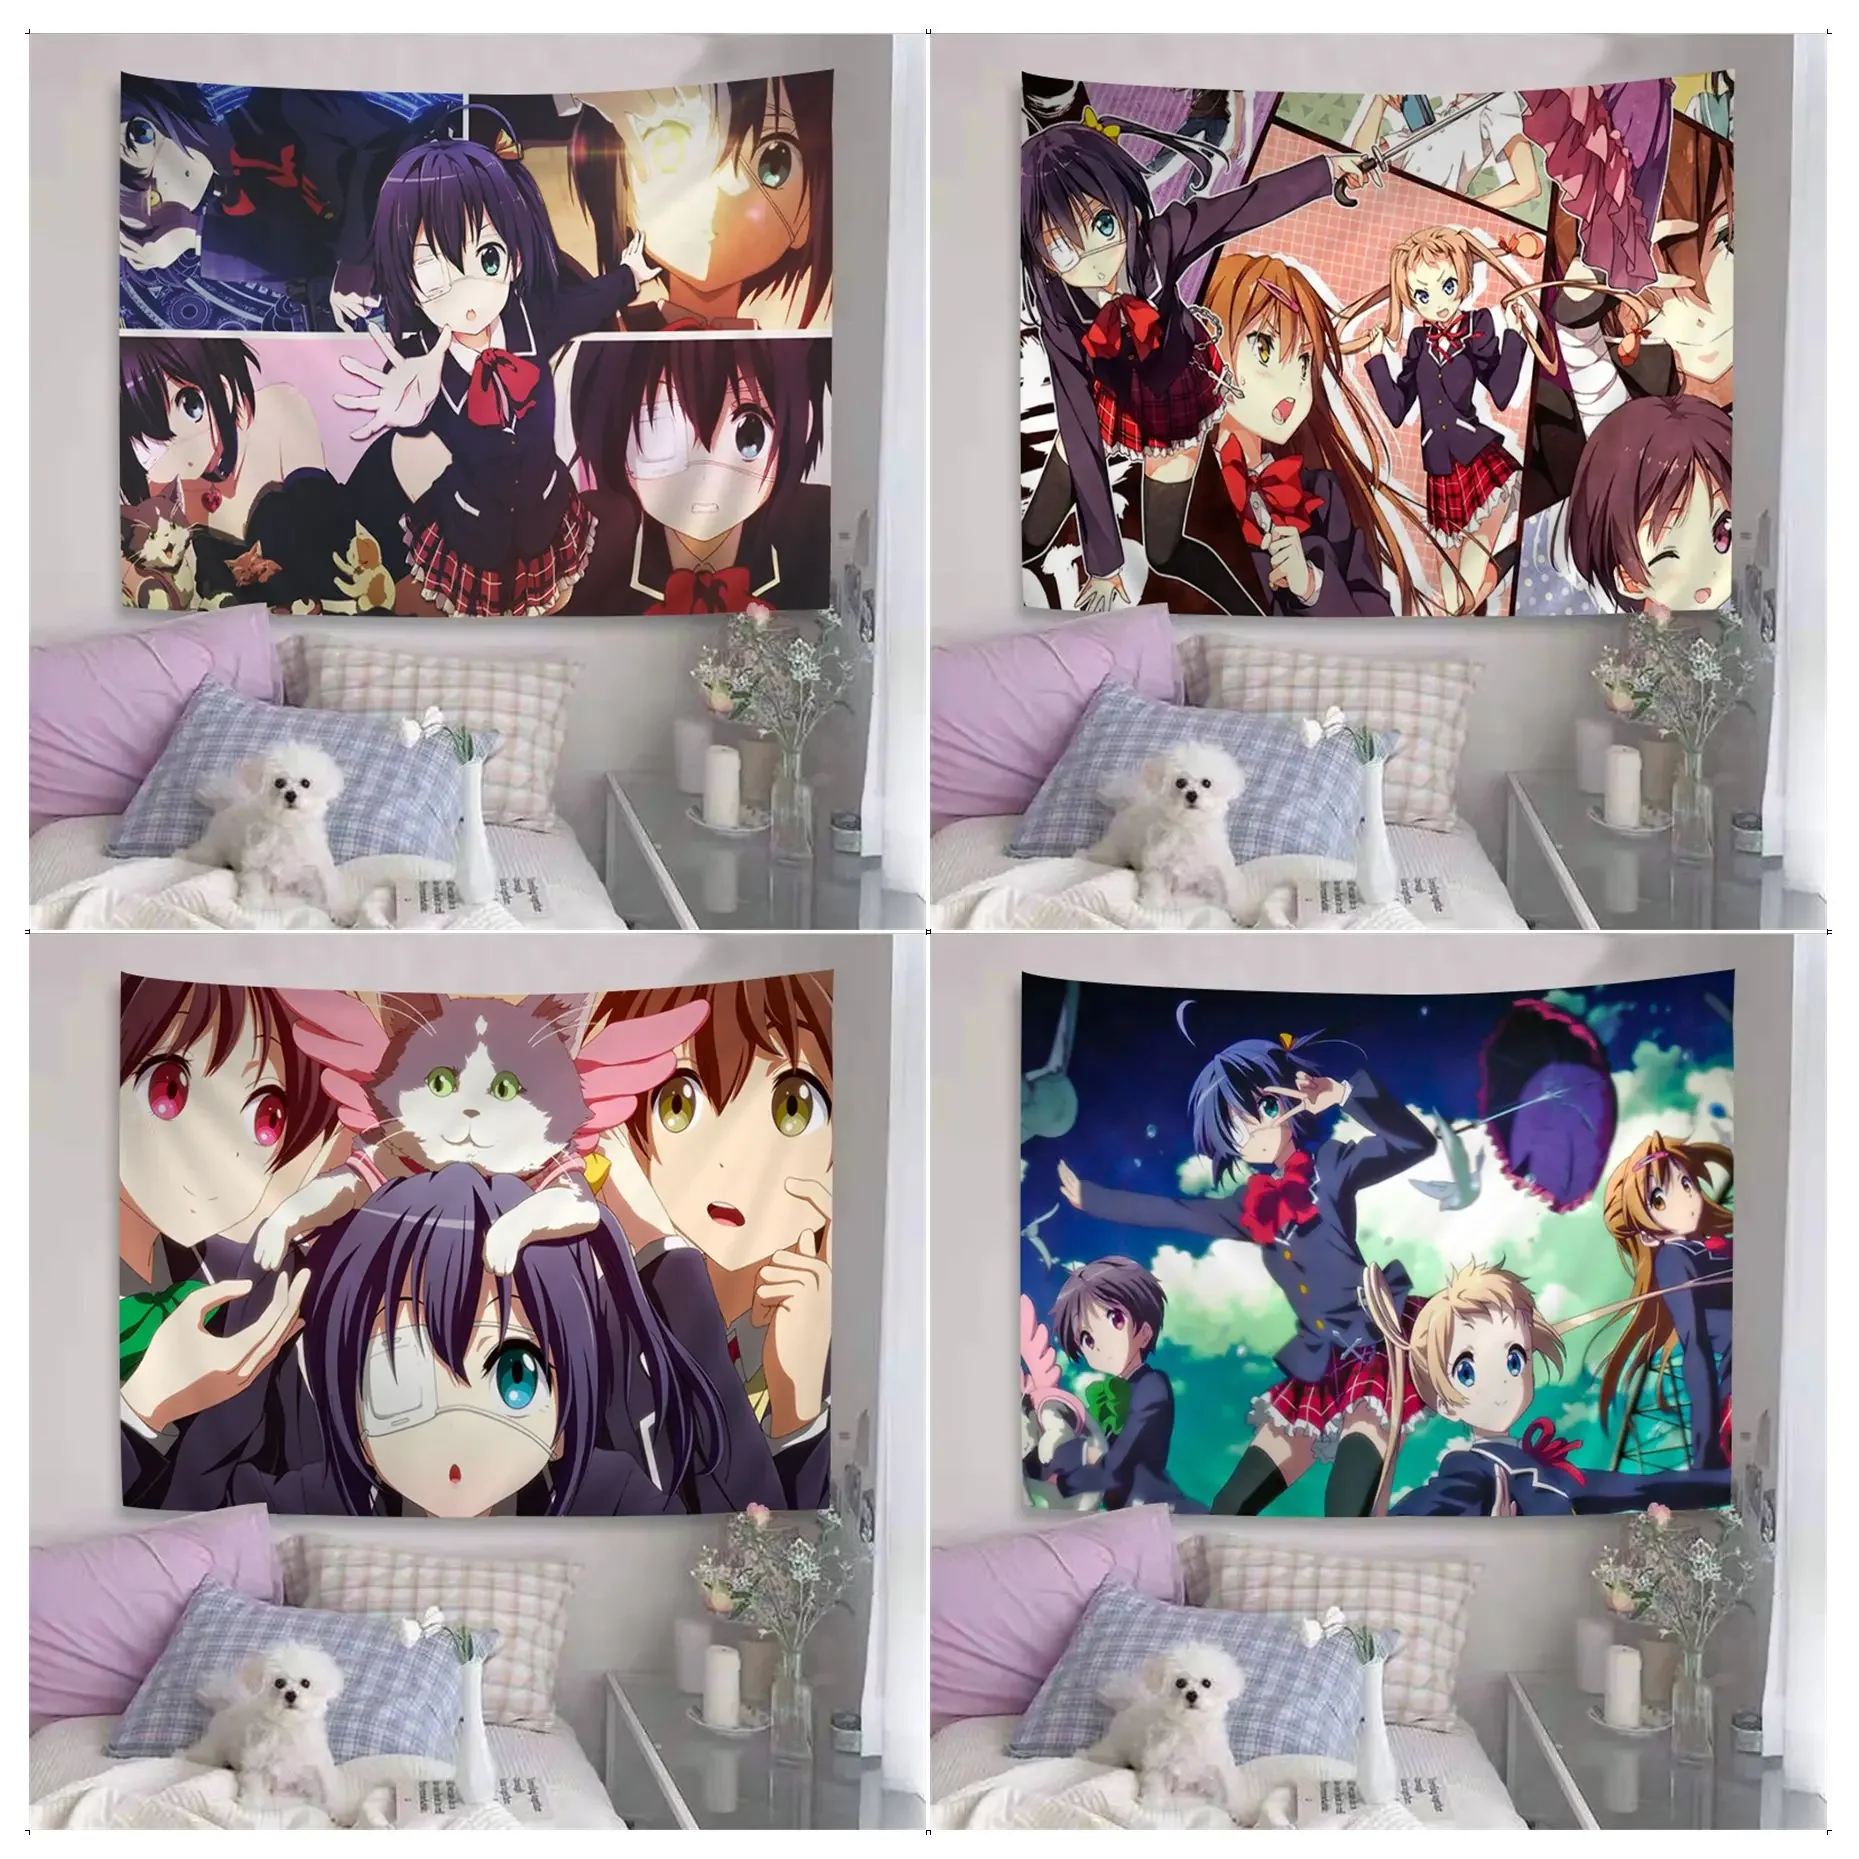 

Love Chunibyo Other Delusions Rikka Tapestry Hanging Bohemian Tapestry Indian Buddha Wall Bohemian Hippie Cheap Hippie Hanging